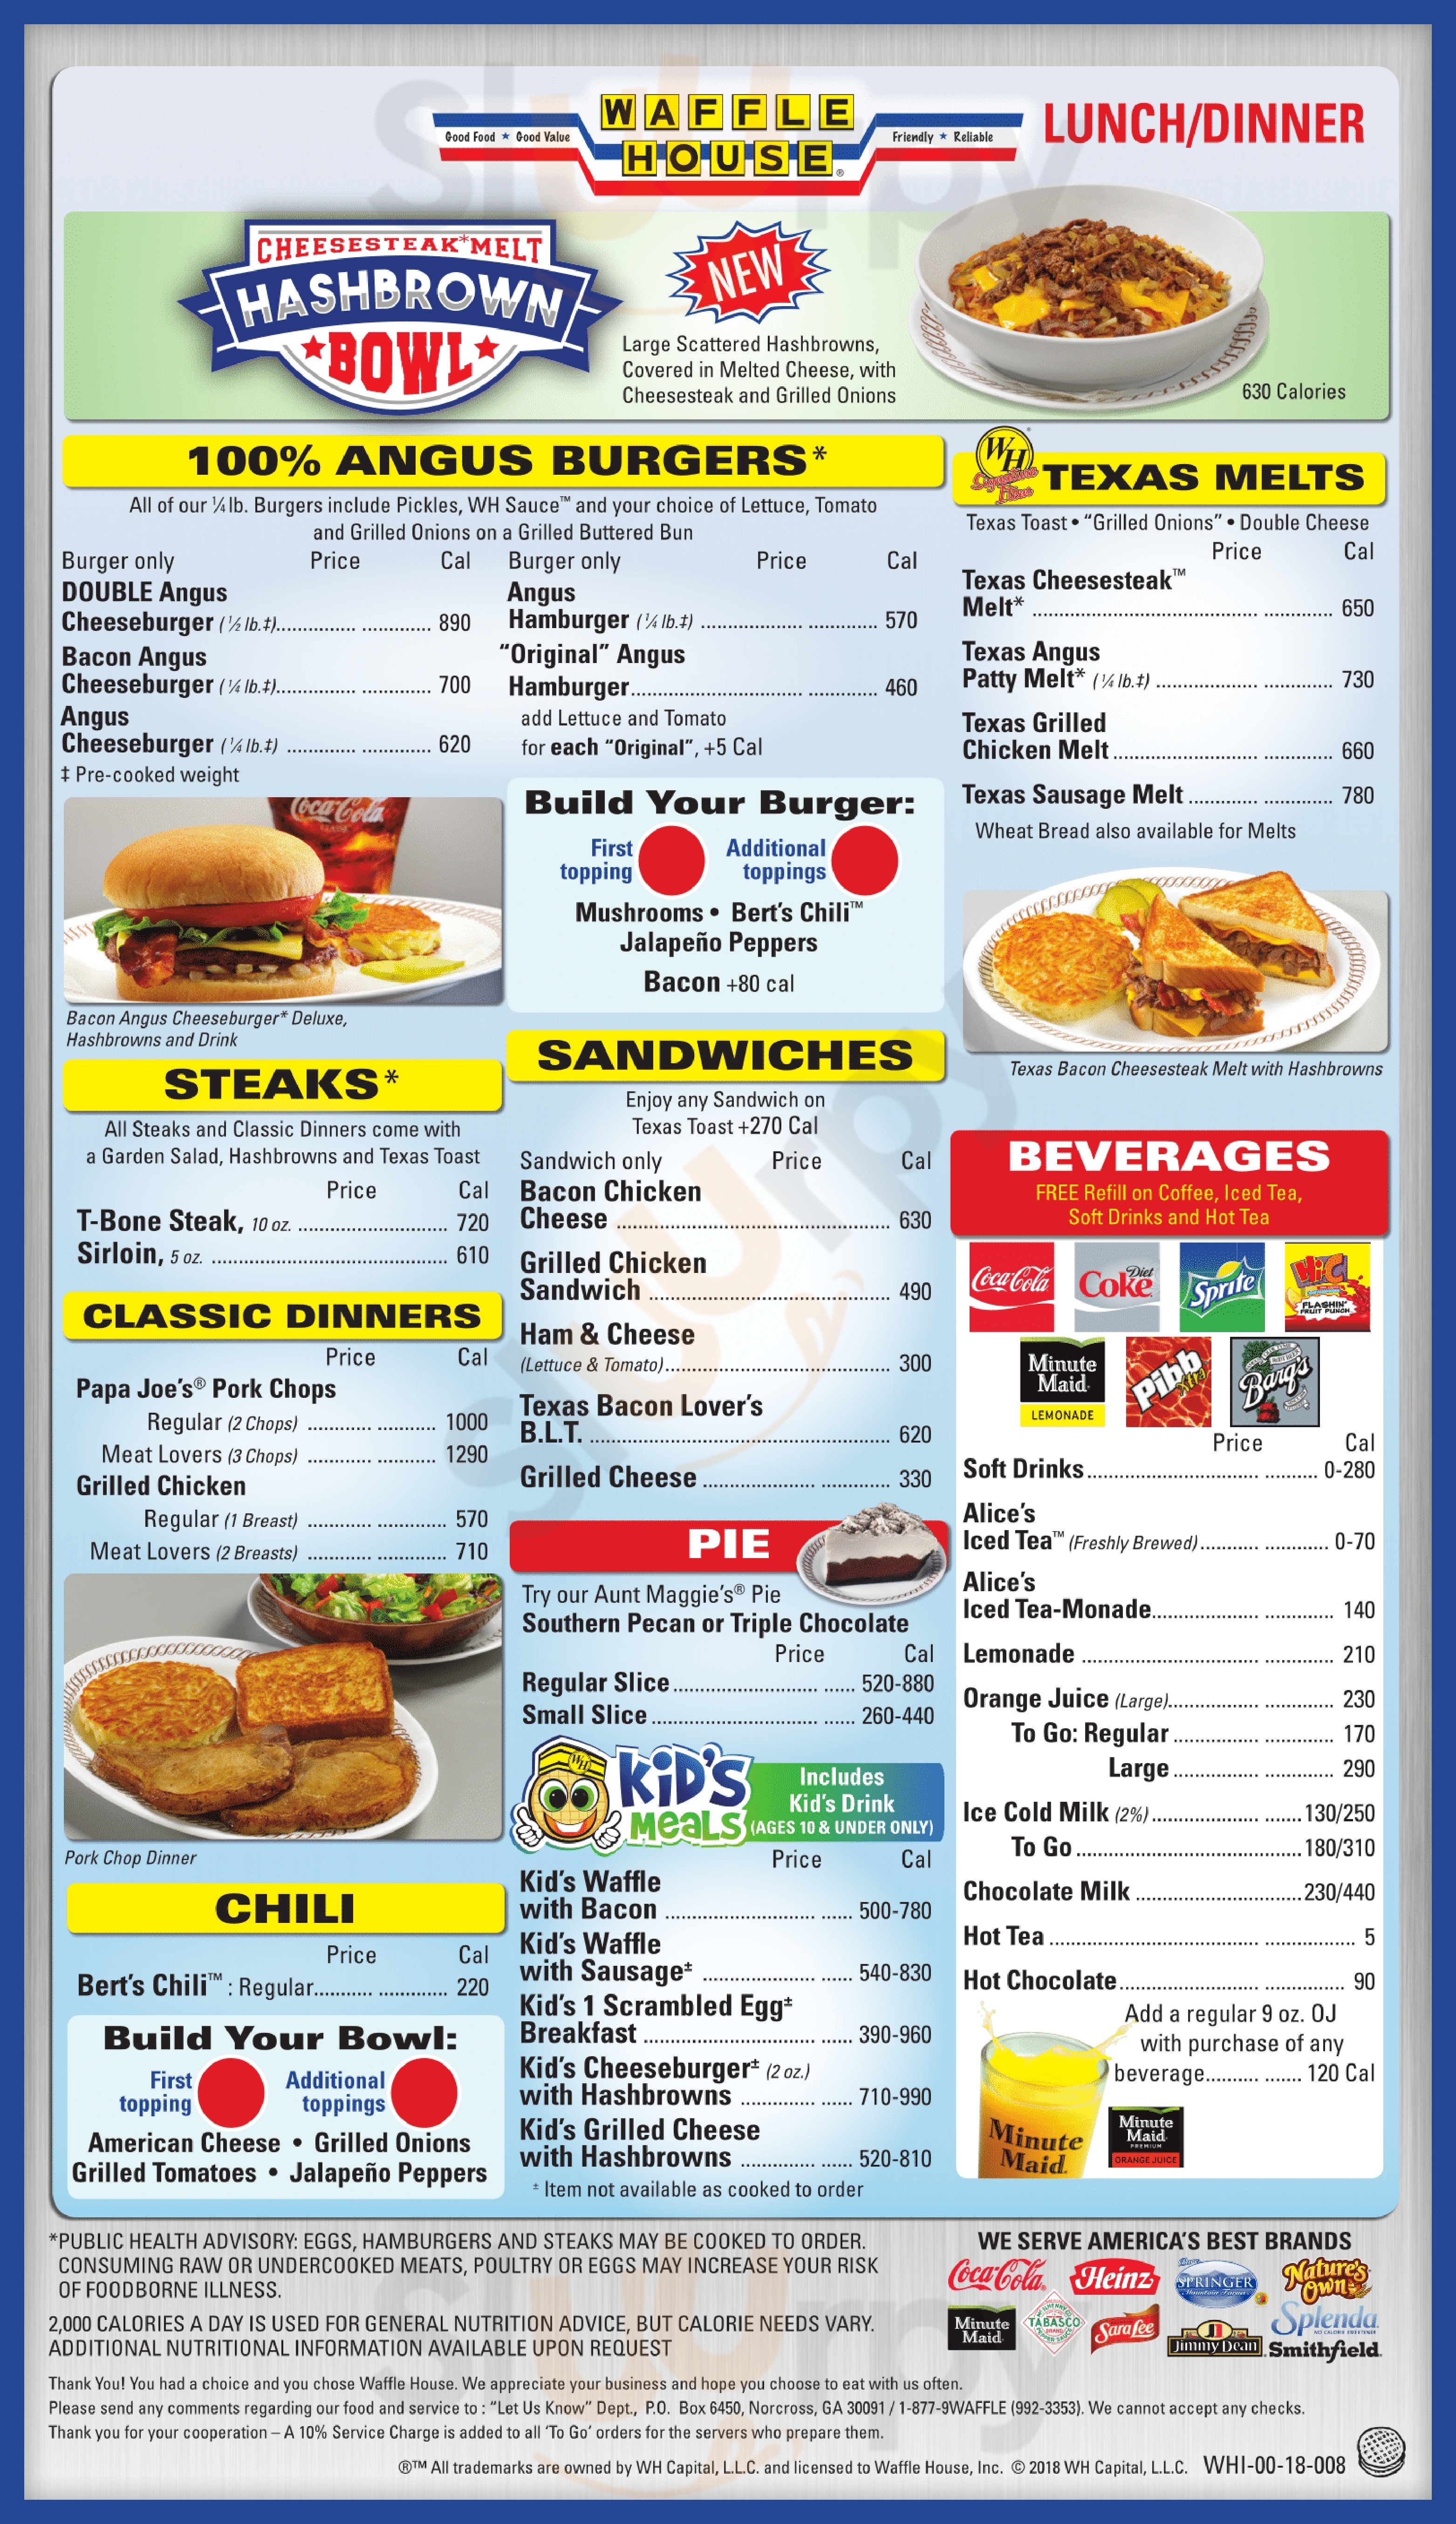 Waffle House Knoxville Menu - 1